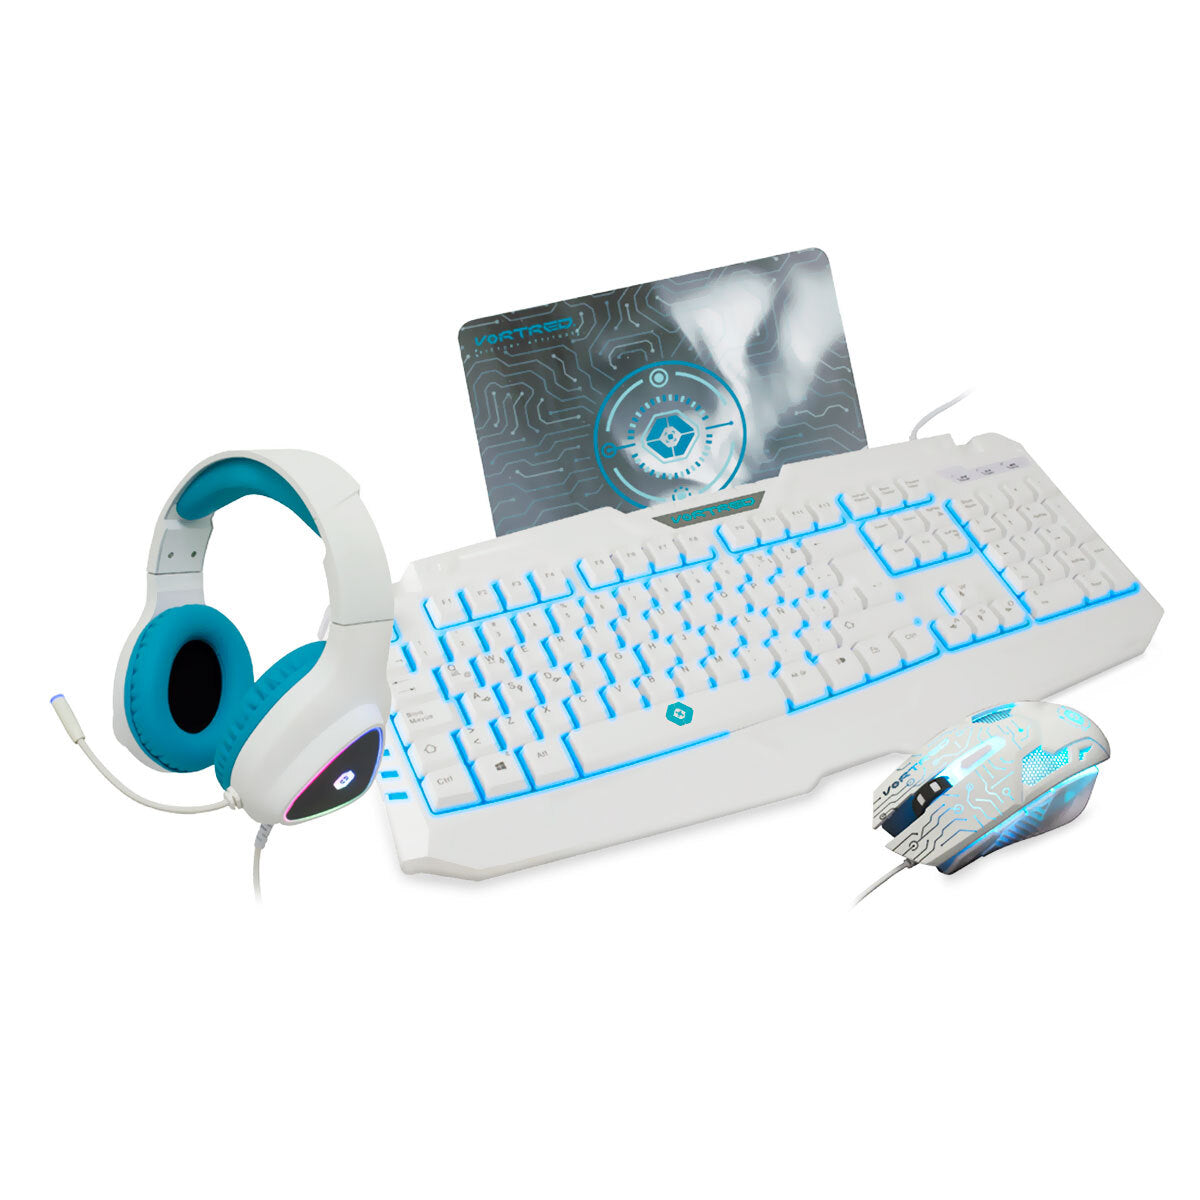 Teclado, Mouse, Tapete Y Diadema Gaming Vortred By Perfect Choice Luz Rgb Blanco